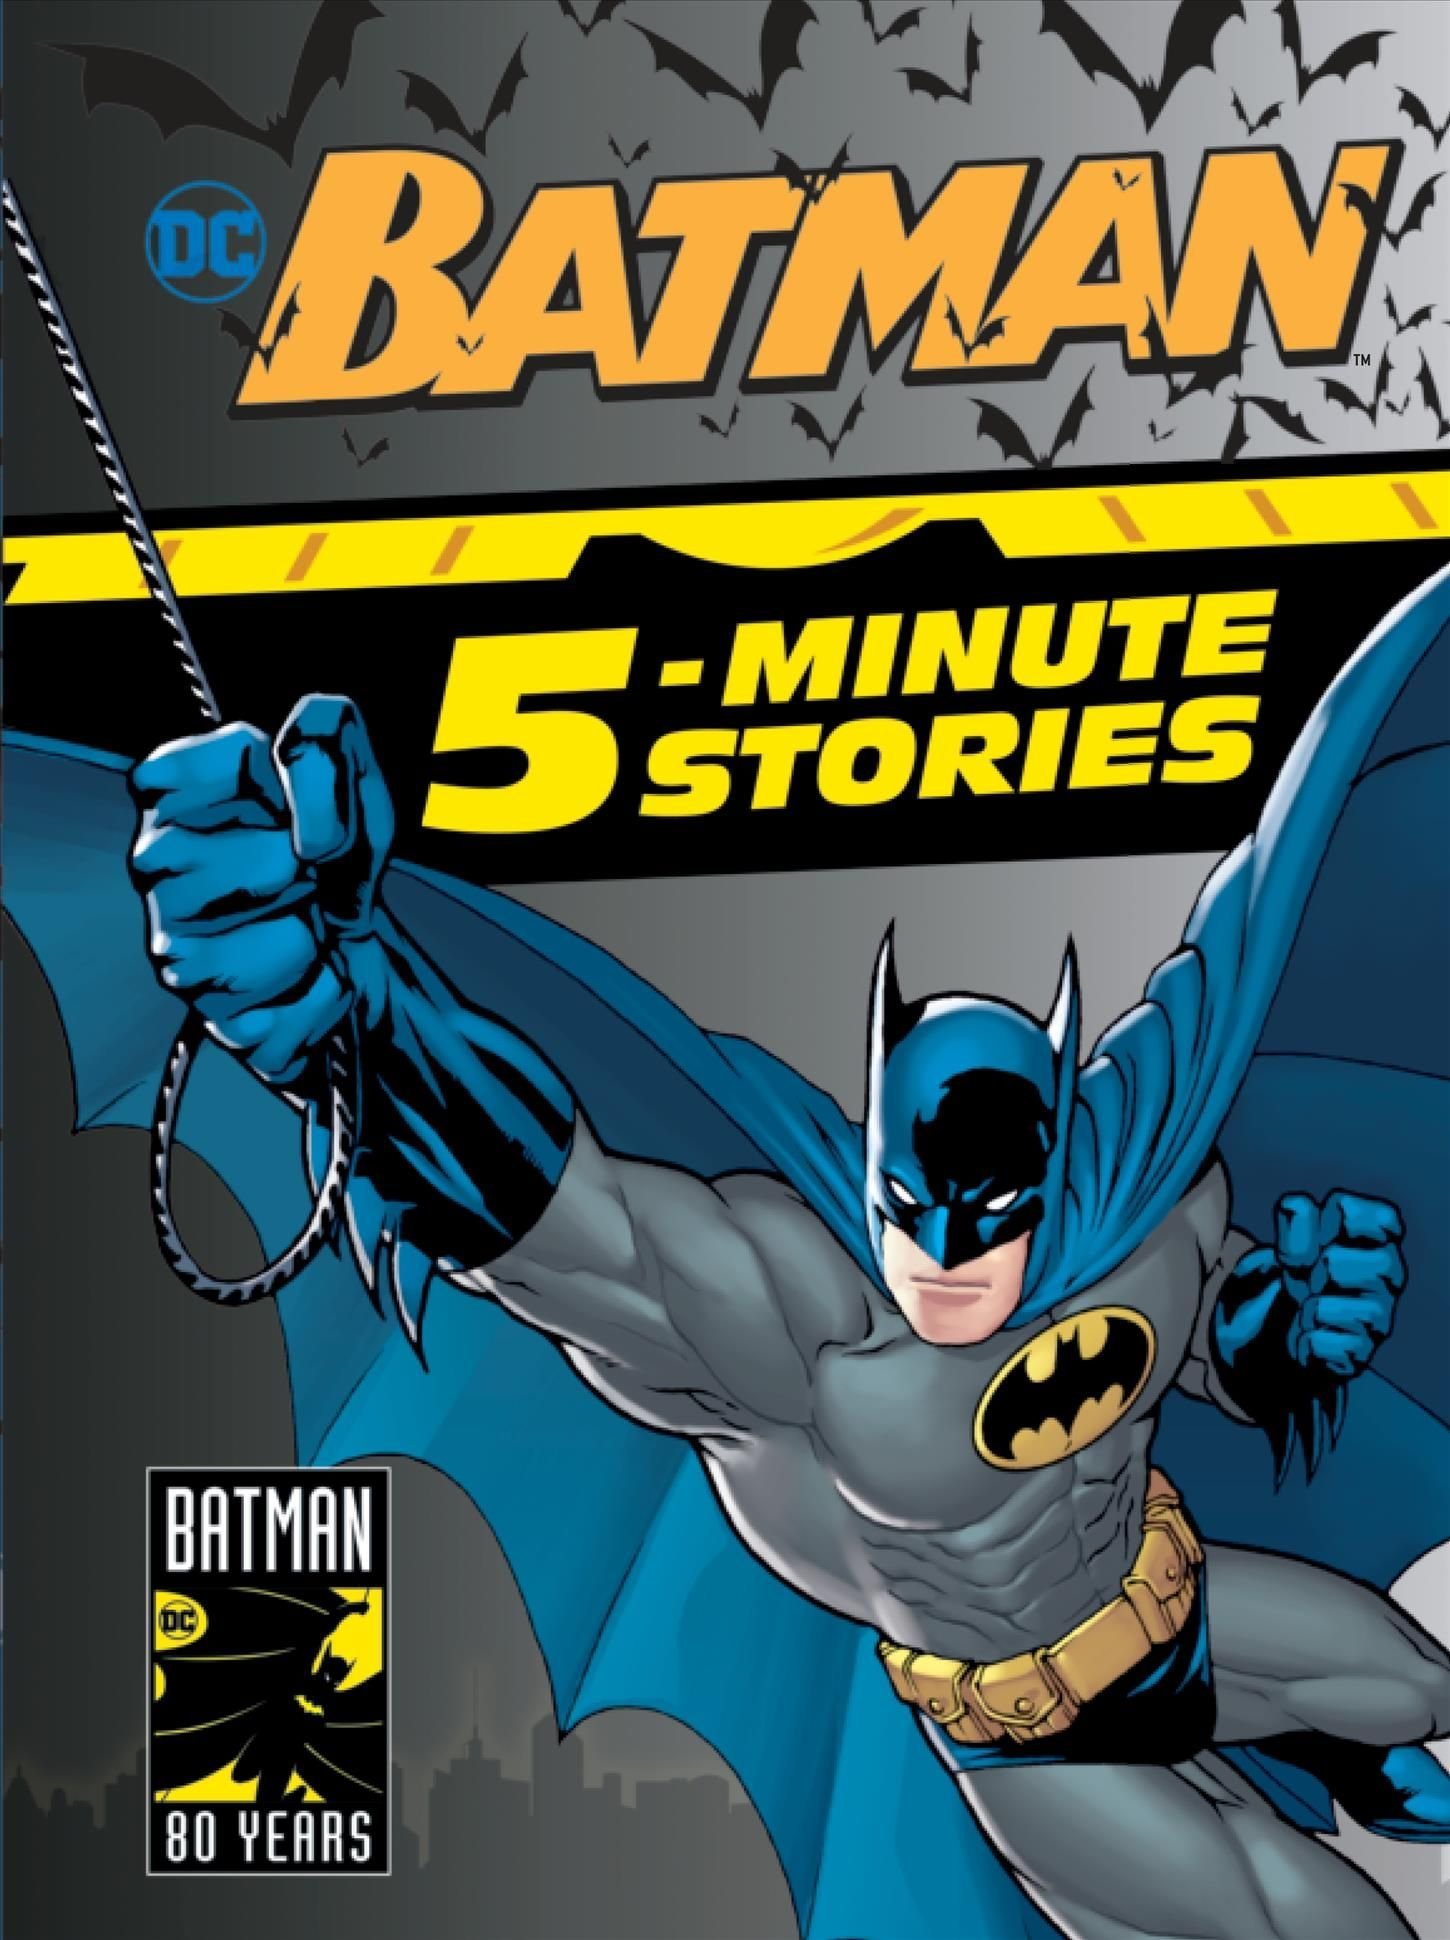 Buy Batman 5-Minute Stories (DC Batman) by DC Comics With Free Delivery |  